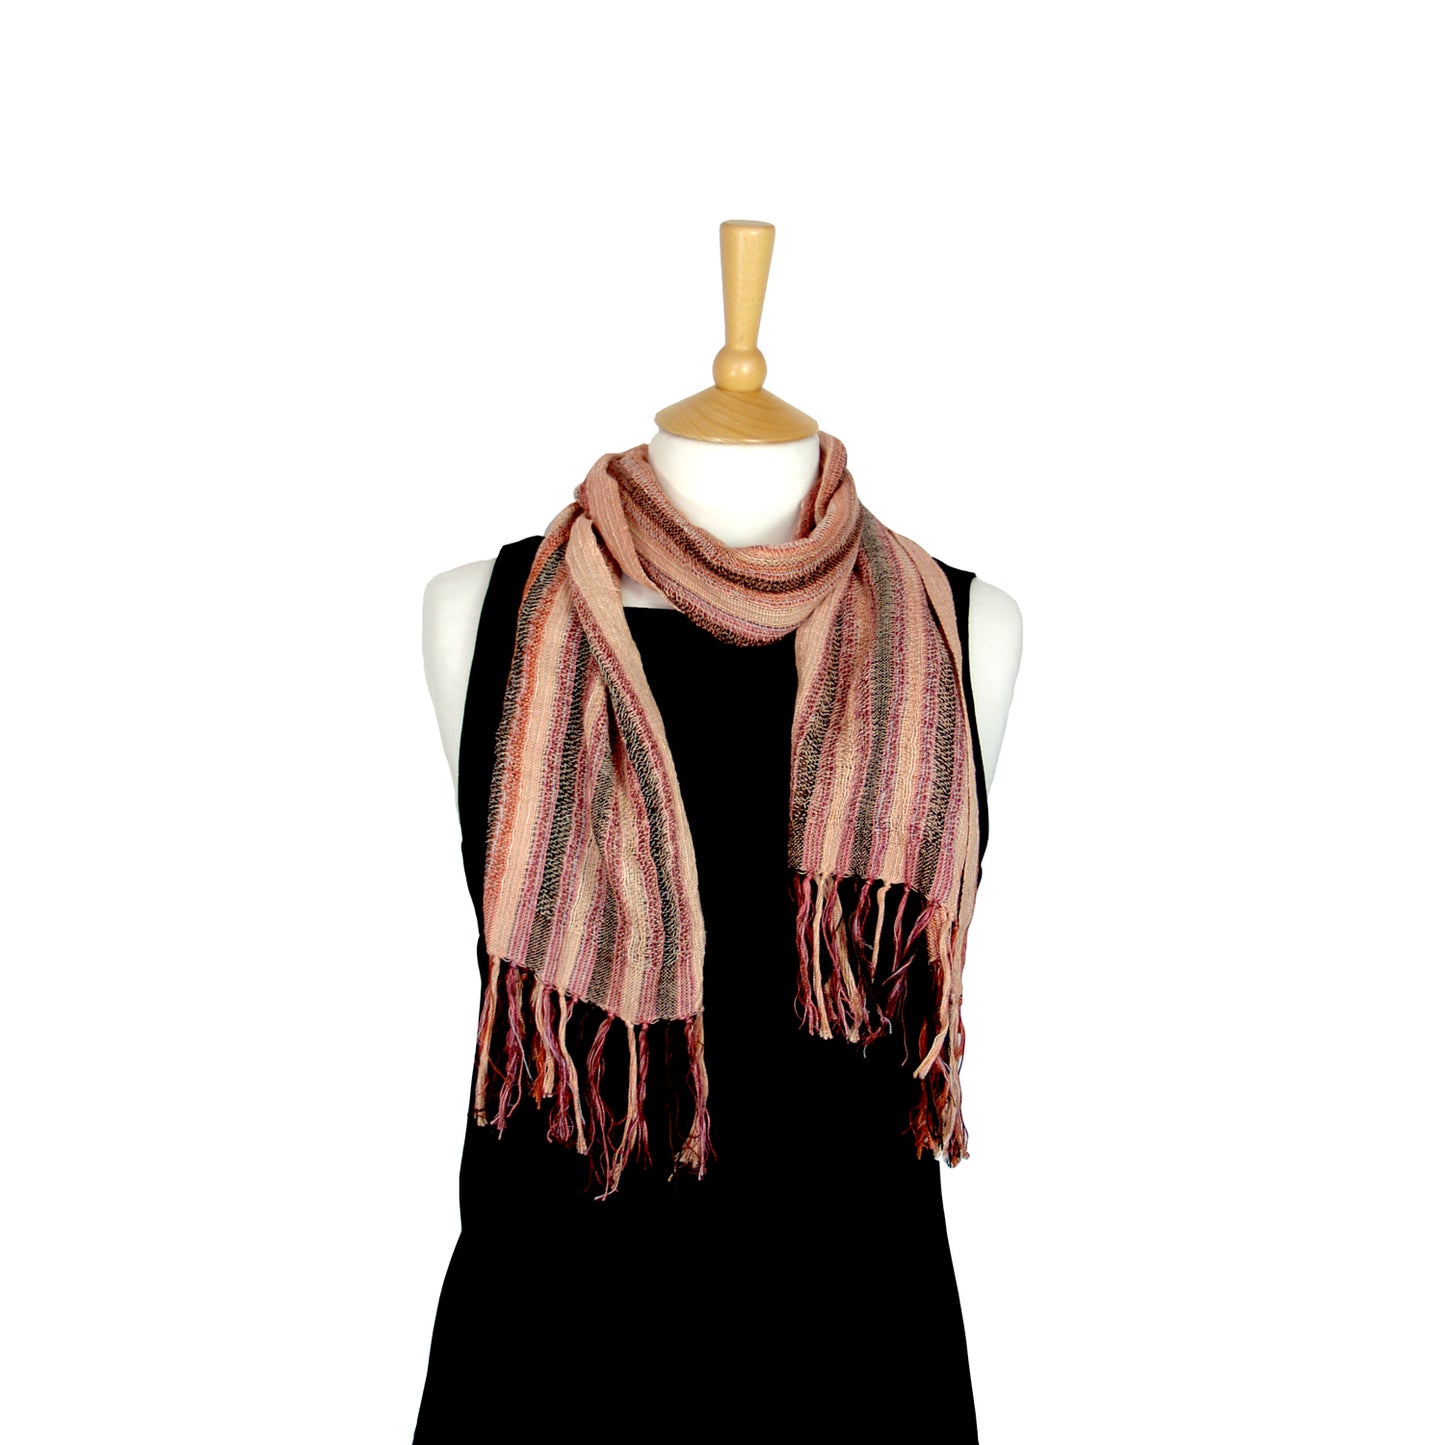 Handwoven Xylem Scarf- End of line